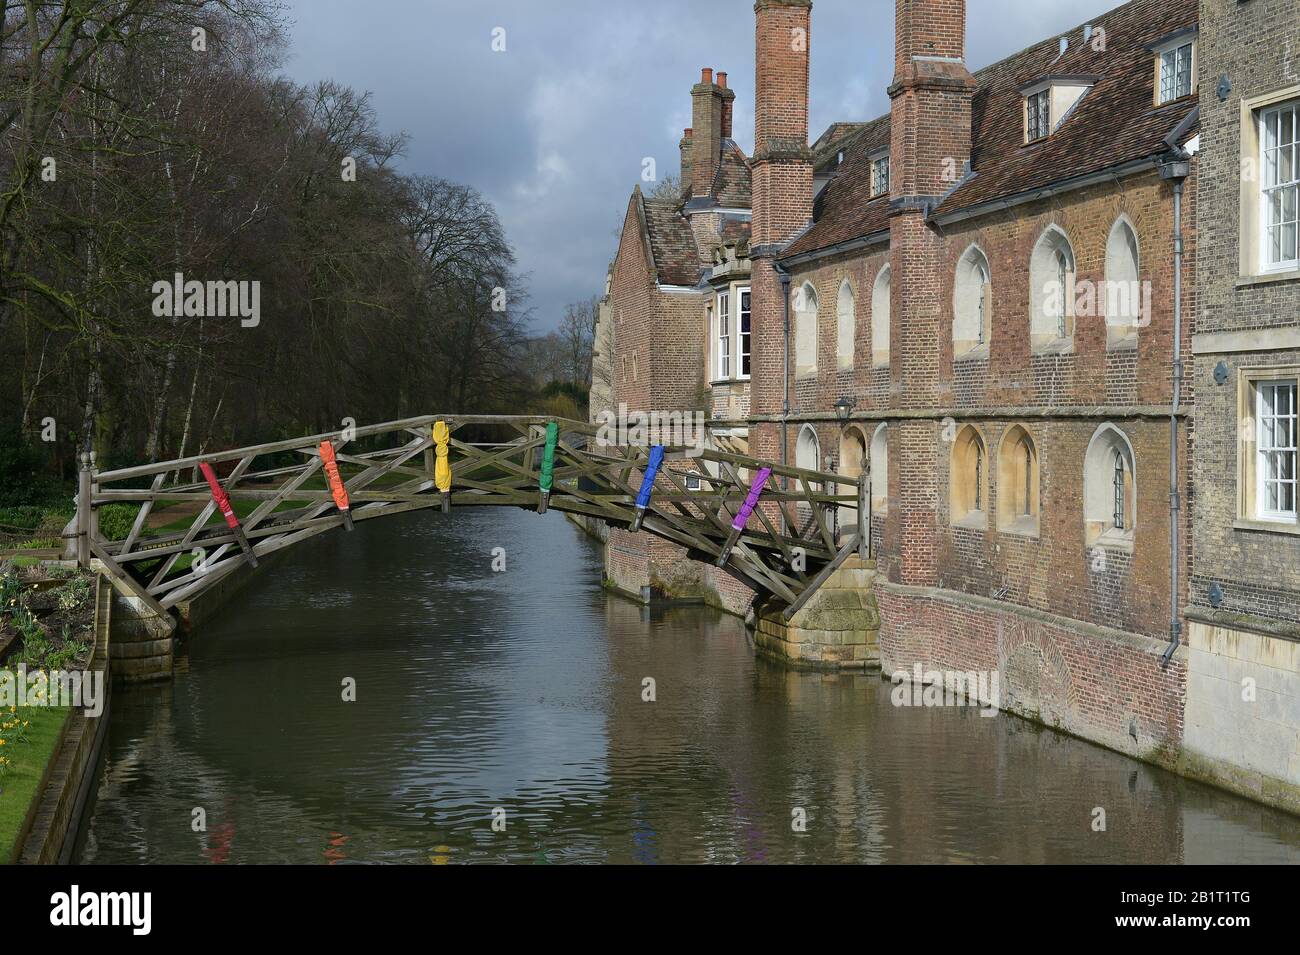 Cambridge England 27th February 2020. Visitors to the City wrap up warm to ride in Punts on the River Cam as snow and sleet cross the UKCambridge Engl Stock Photo